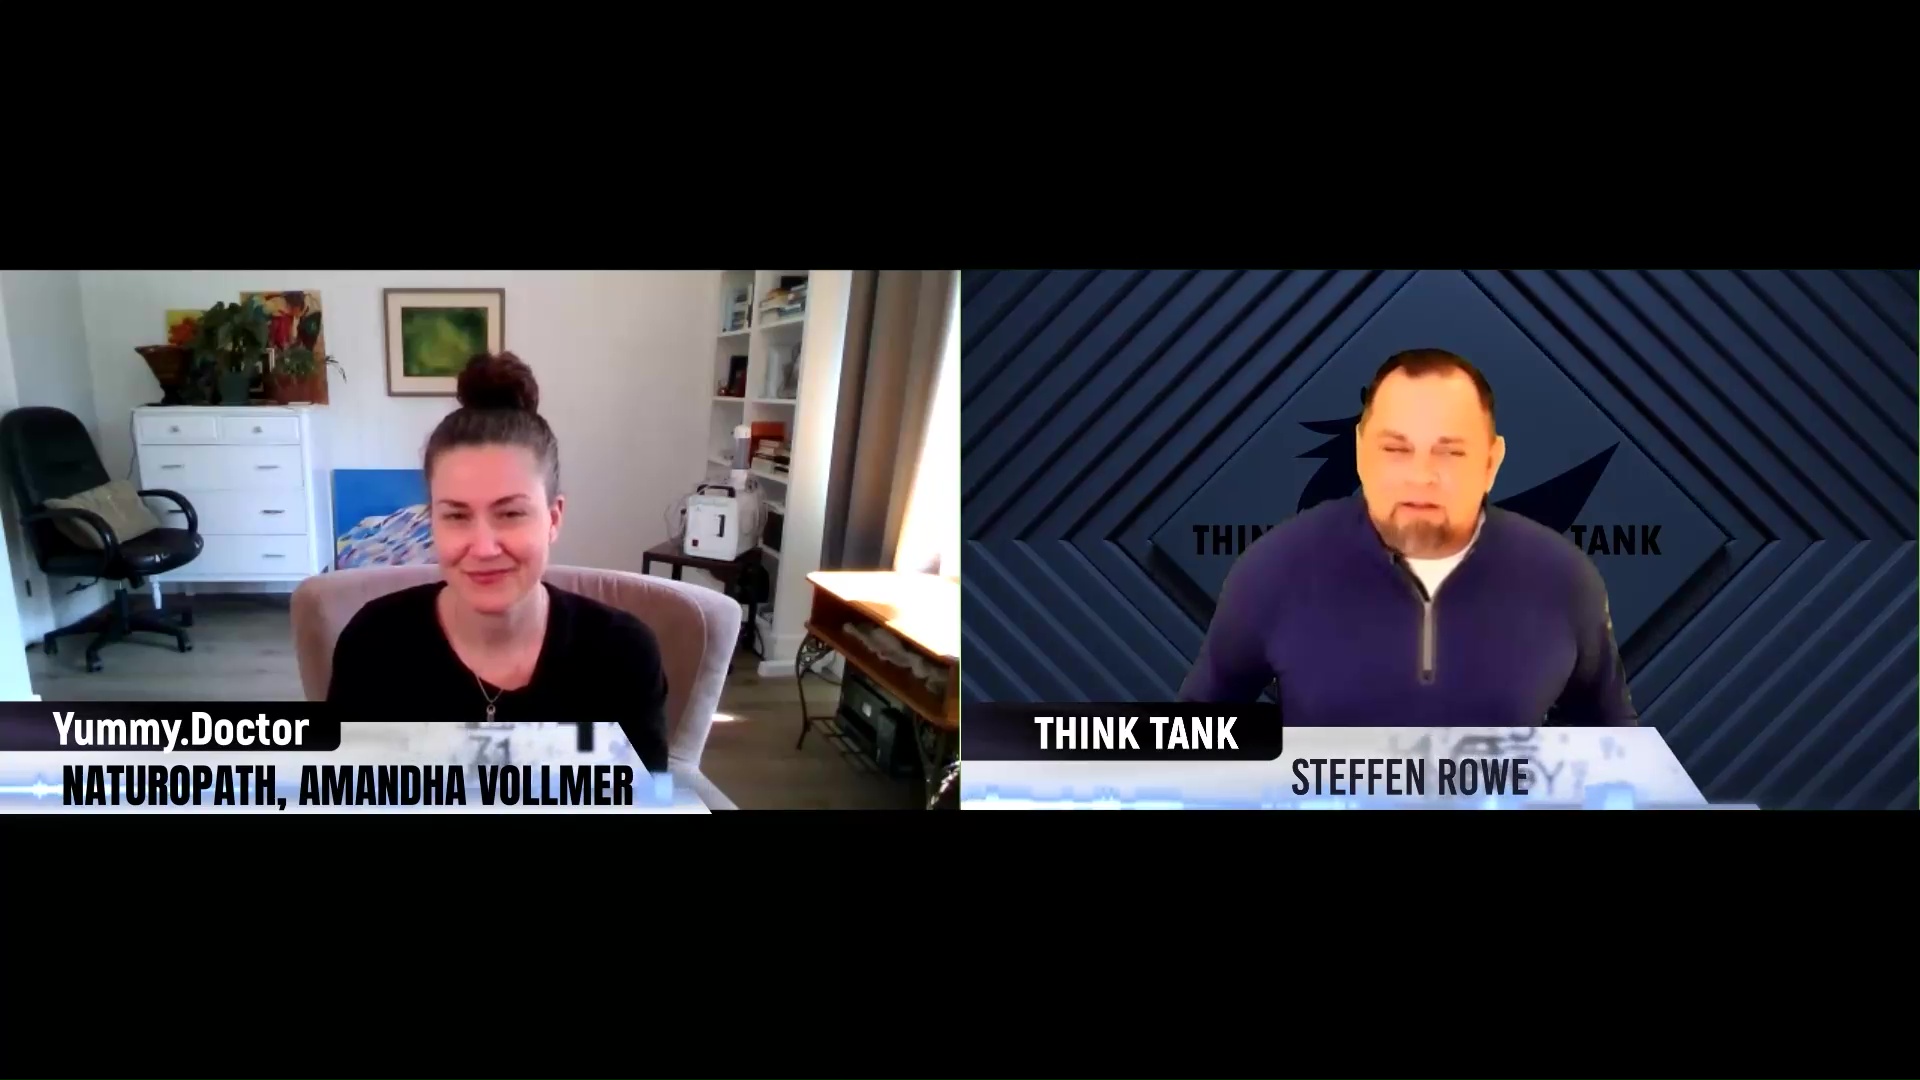 ADV Talks About High Level Concepts on Think Tank Episode 8